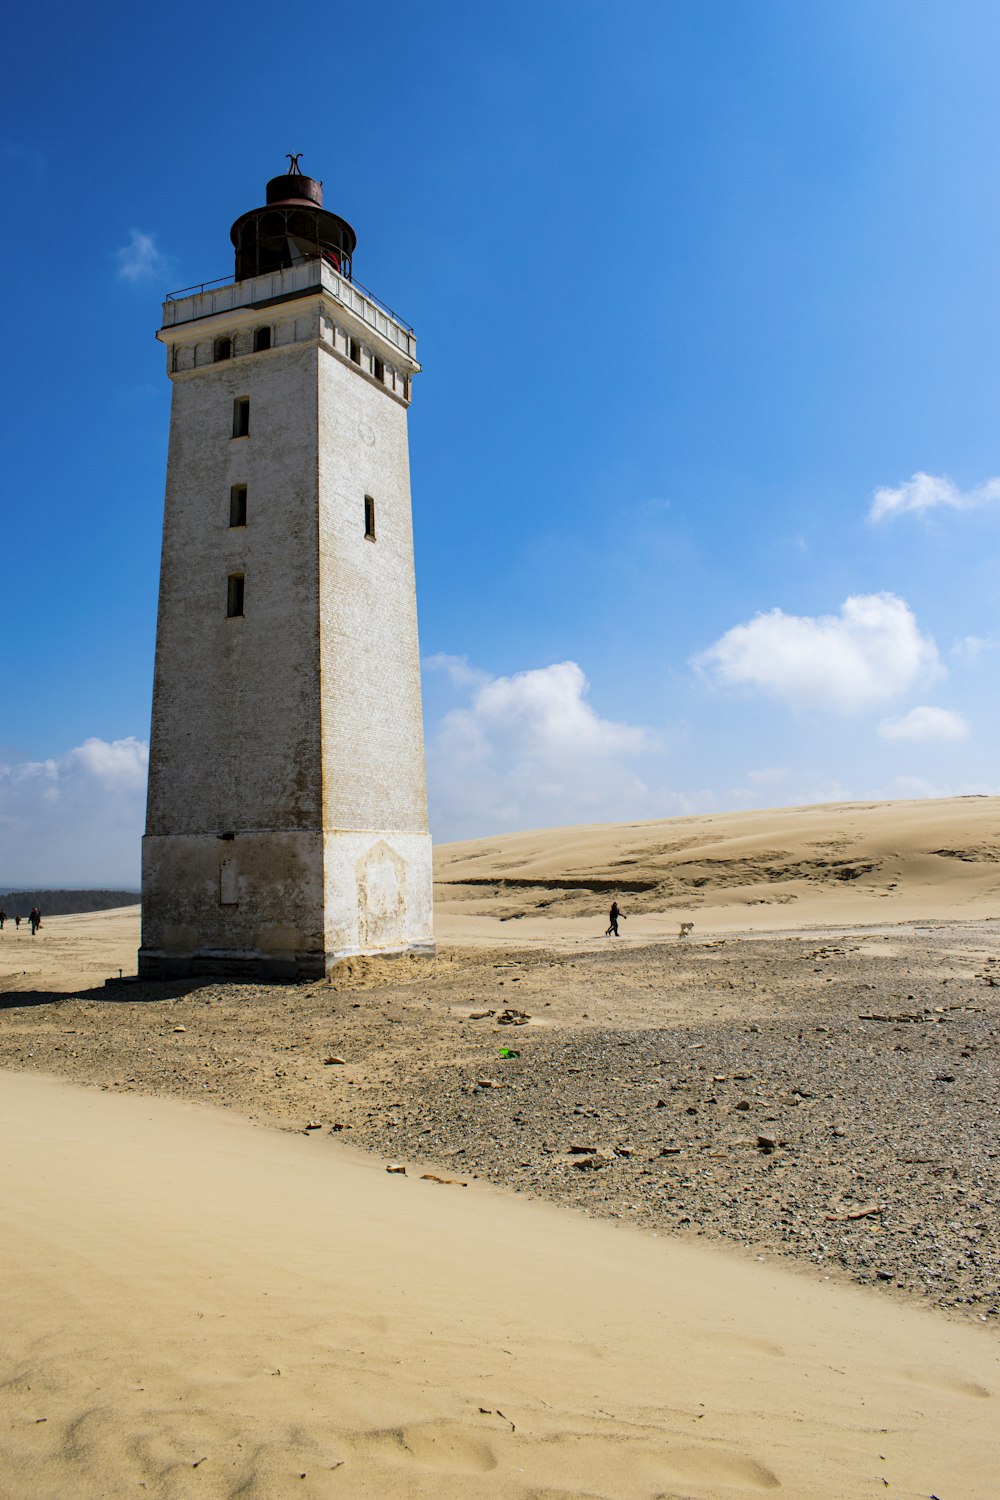 a lighthouse in the middle of a sandy area